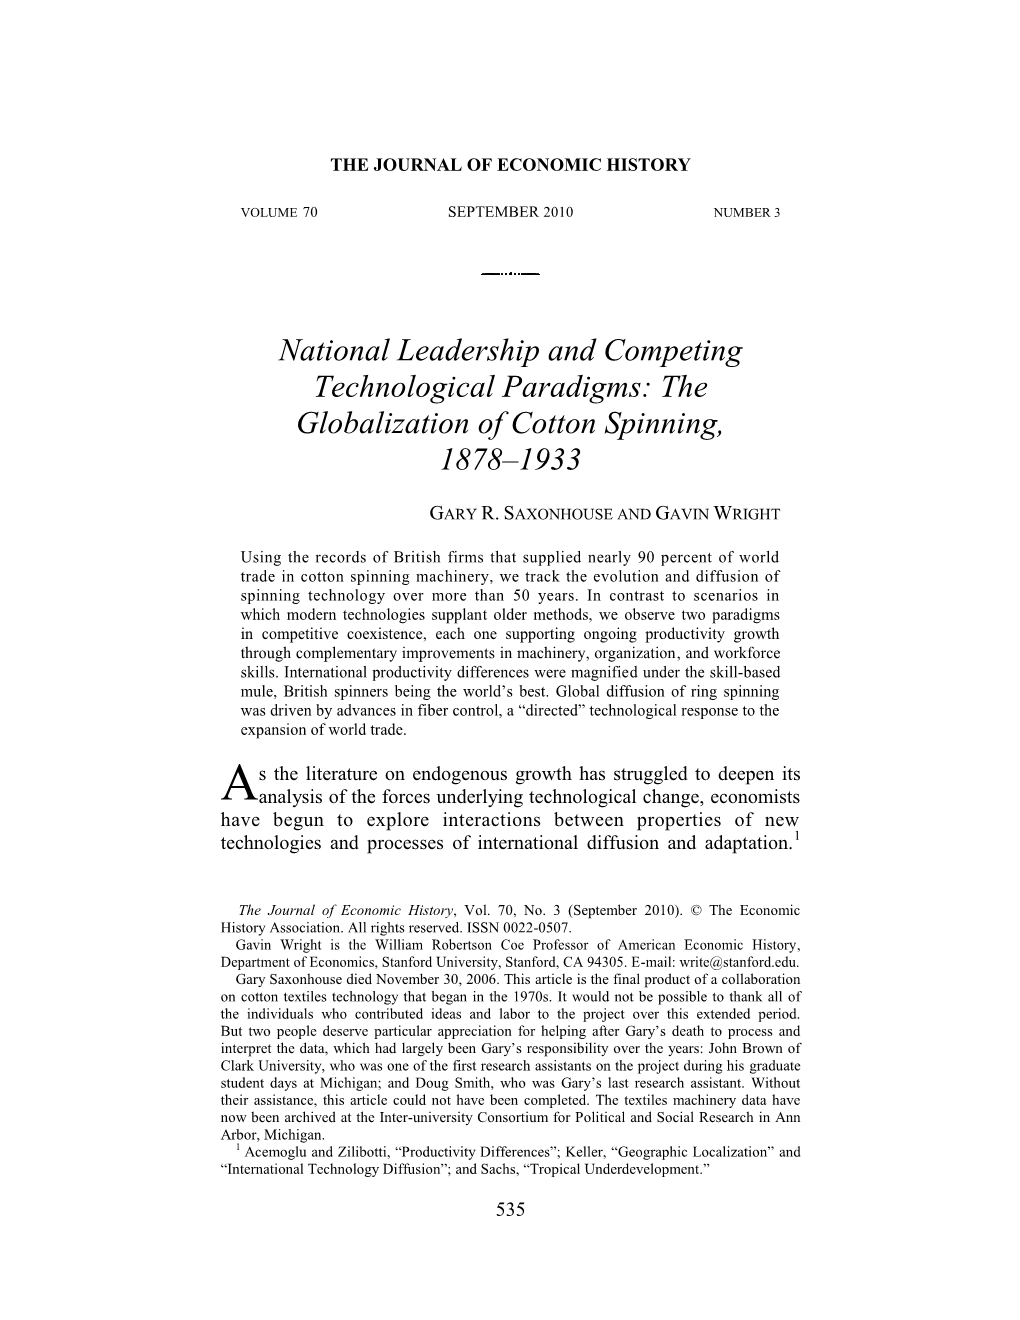 National Leadership and Competing Technological Paradigms: the Globalization of Cotton Spinning, 1878–1933